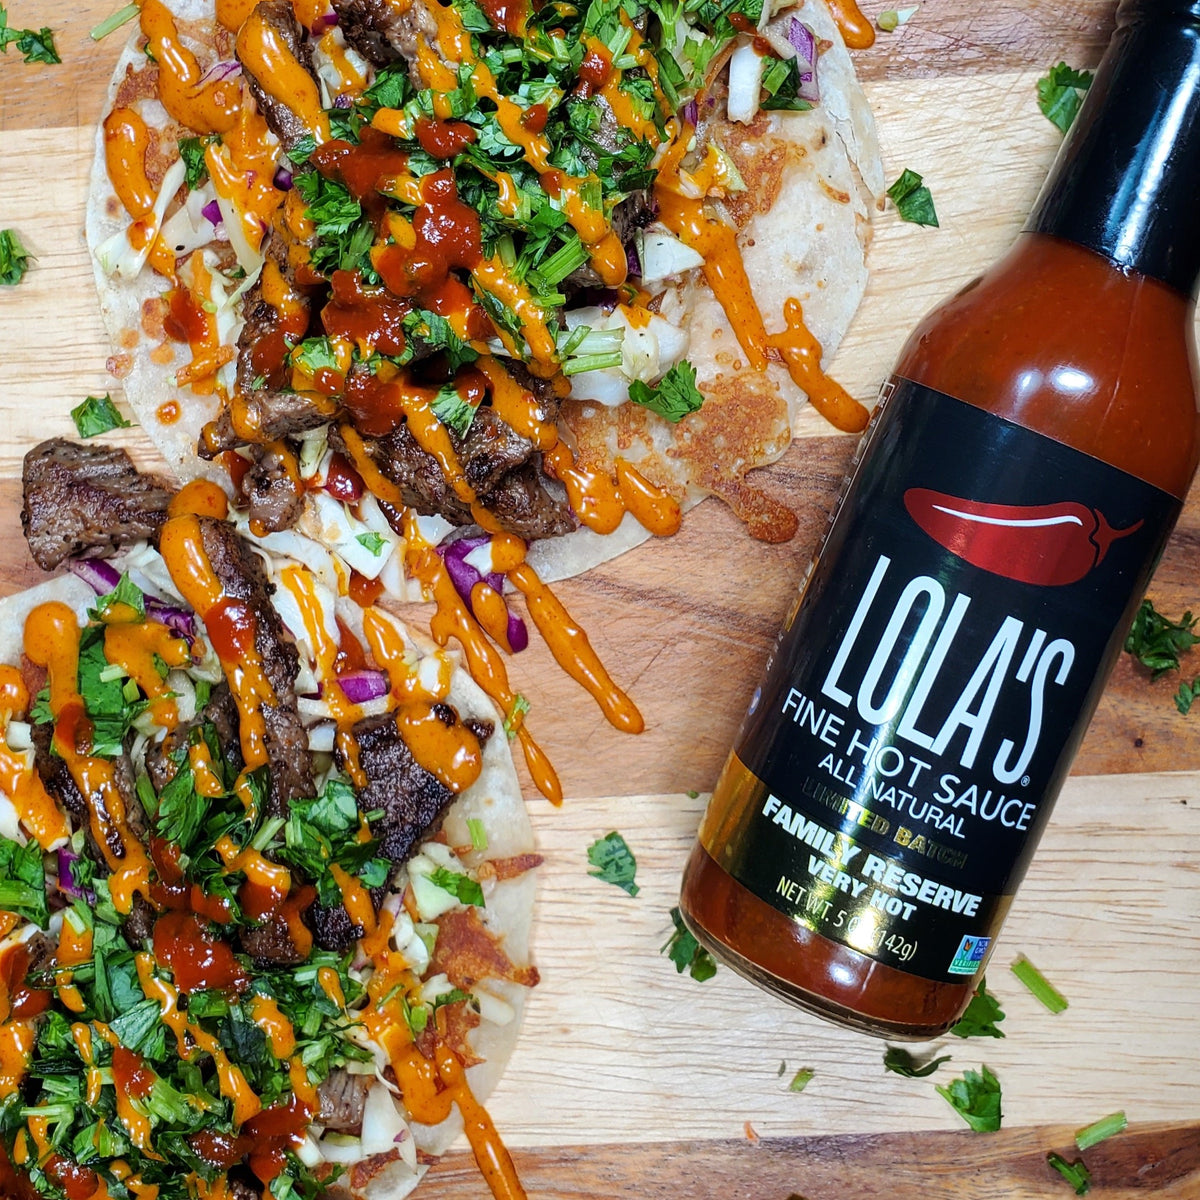 A close-up of Lola's Family Reserve Hot Sauce, a 5 oz. glass bottle with a premium gift box. Crafted with Carolina reaper and habanero peppers, it offers a sweet, smoky, lime flavor with intense heat. 1.8 million+ Scoville rating